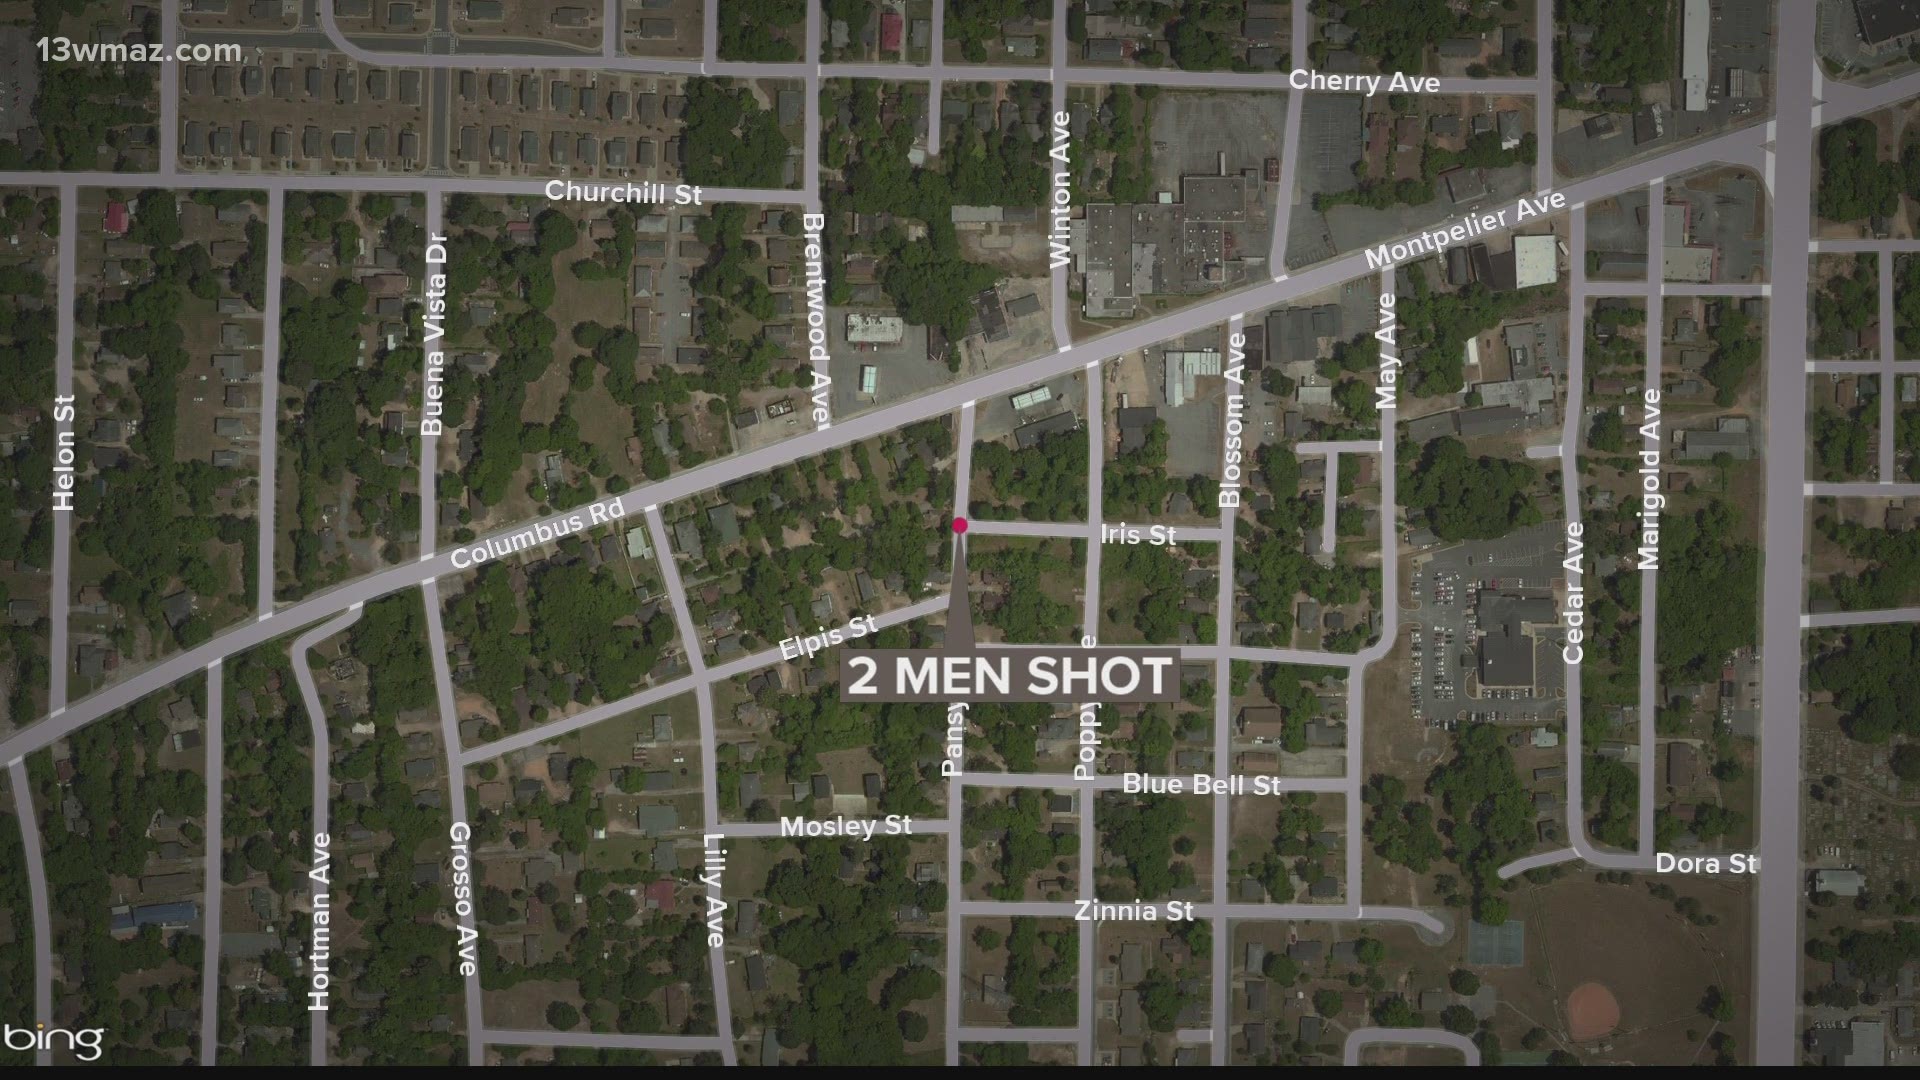 A 25-year-old man was shot in the leg, and another 25-year-old was shot multiple times in the torso.